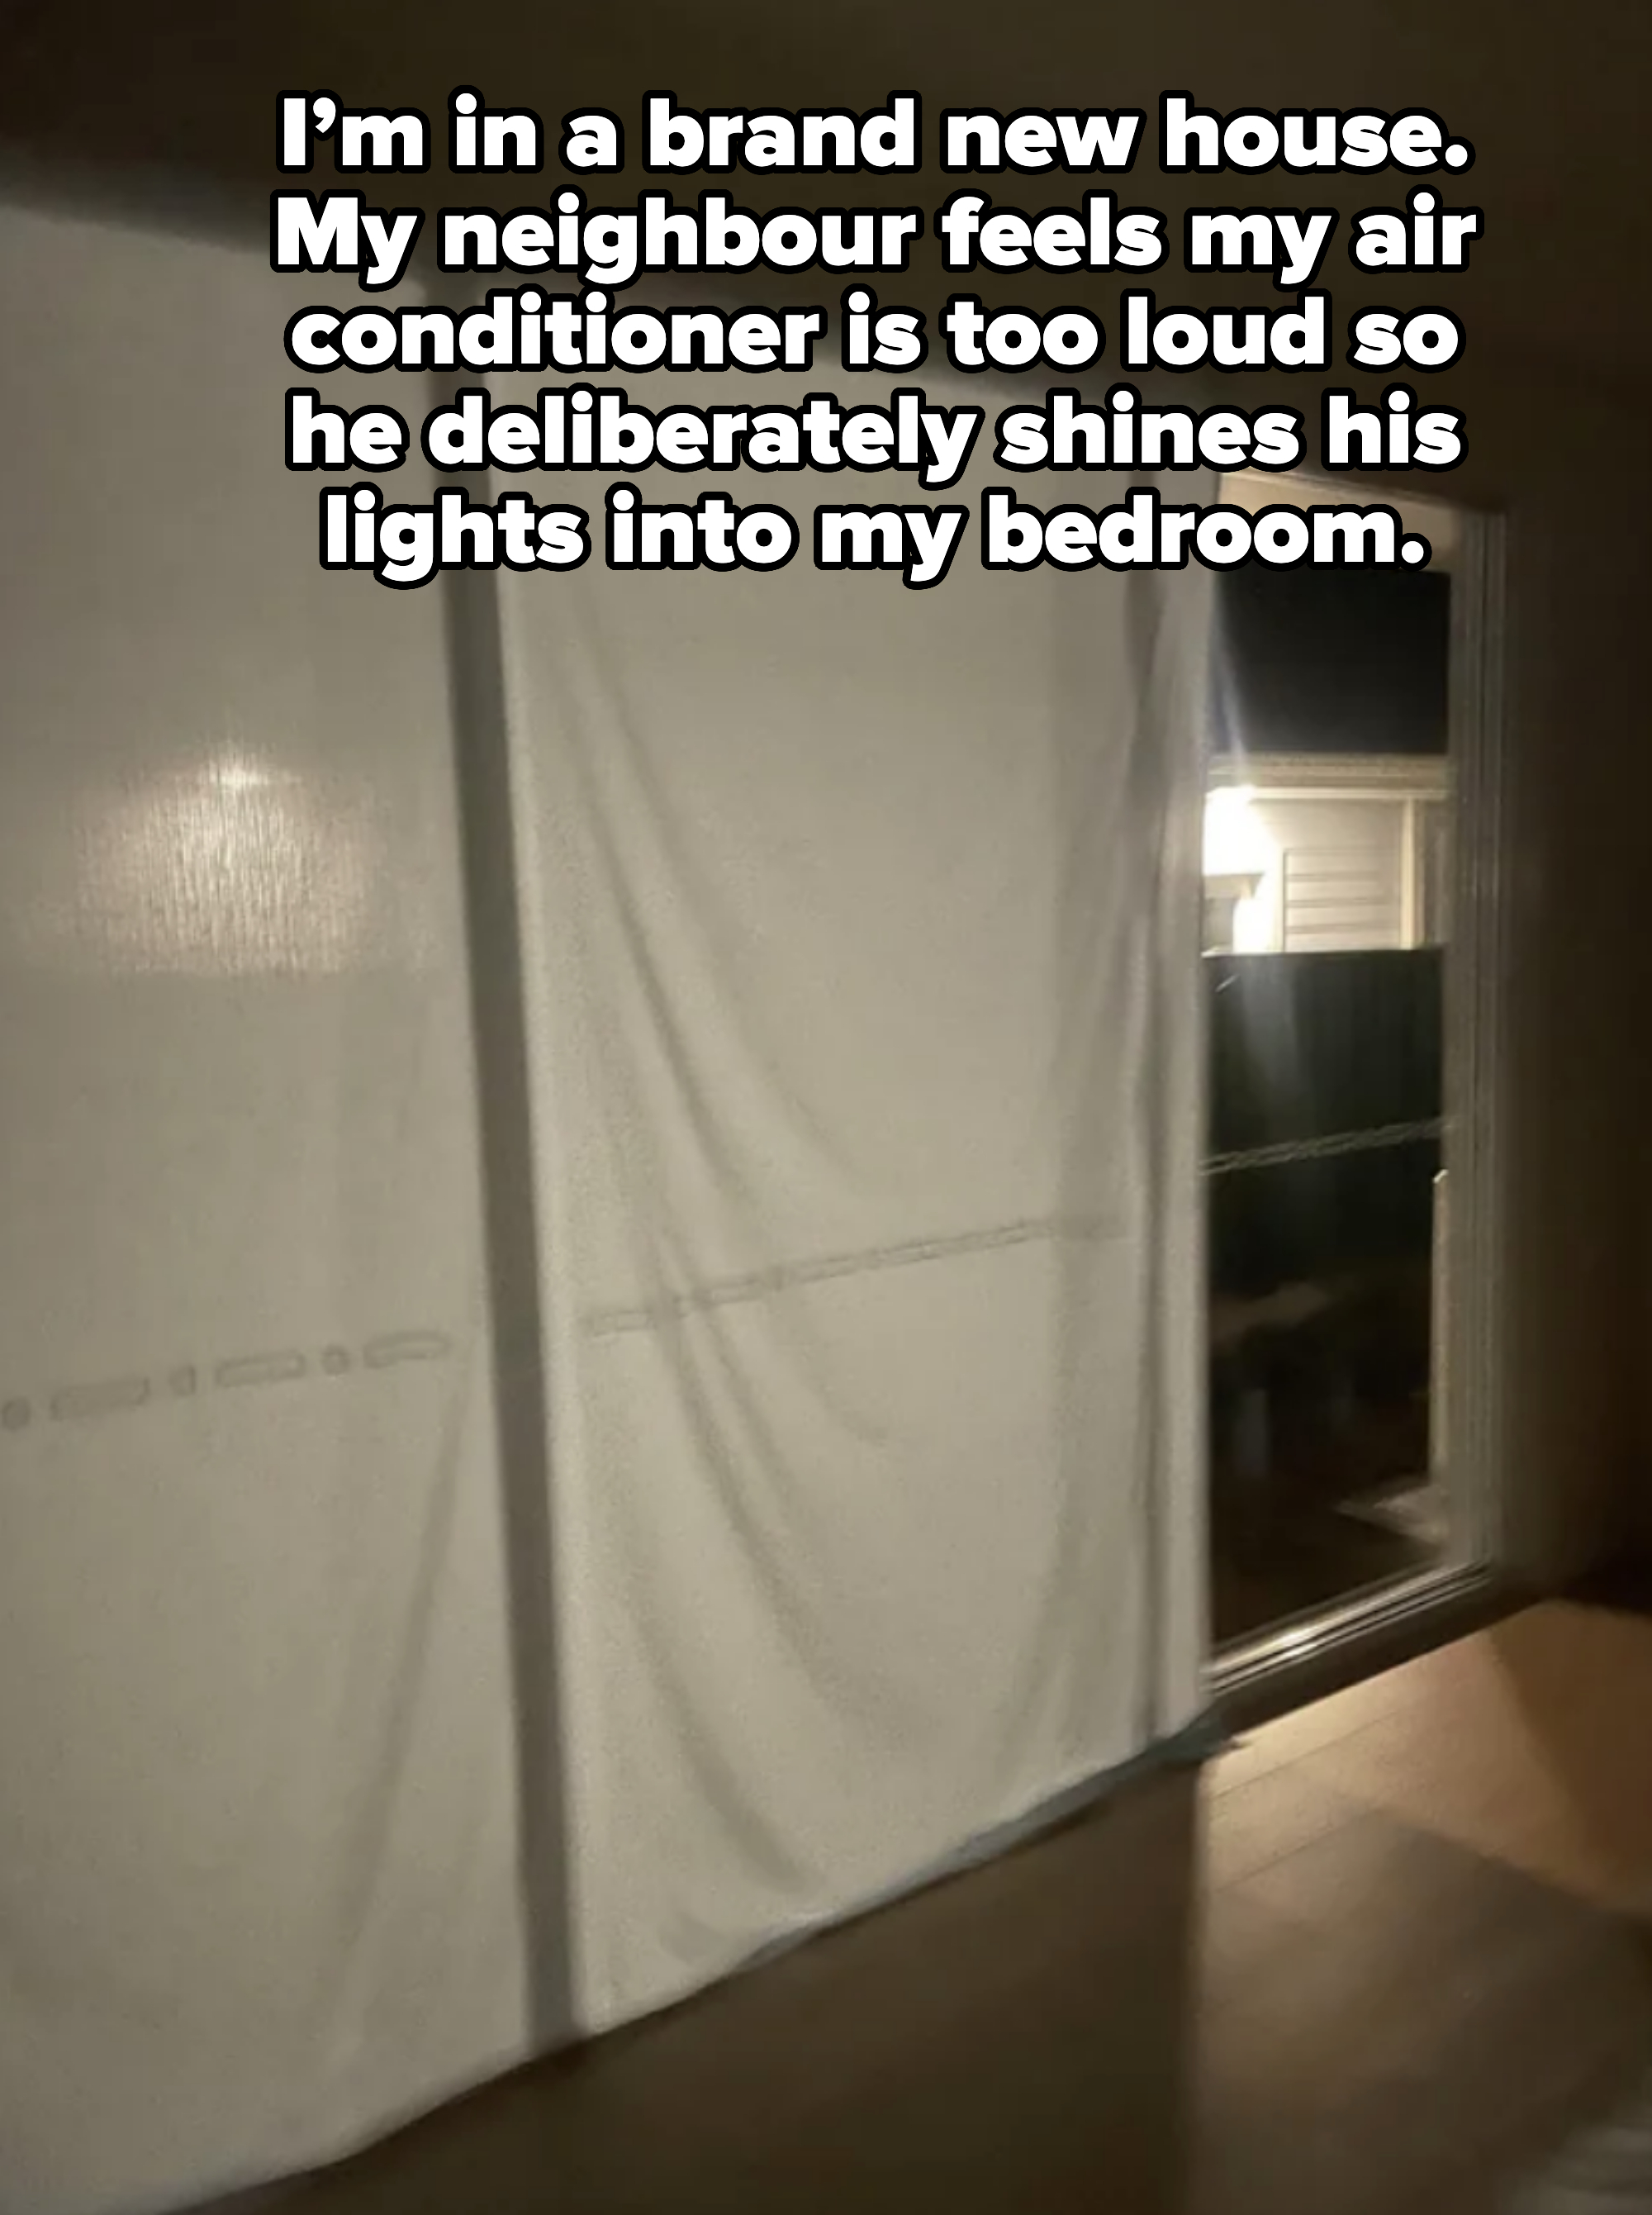 lights shining into bedroom windows with a note saying the neighbor does it because they think the AC is too loud